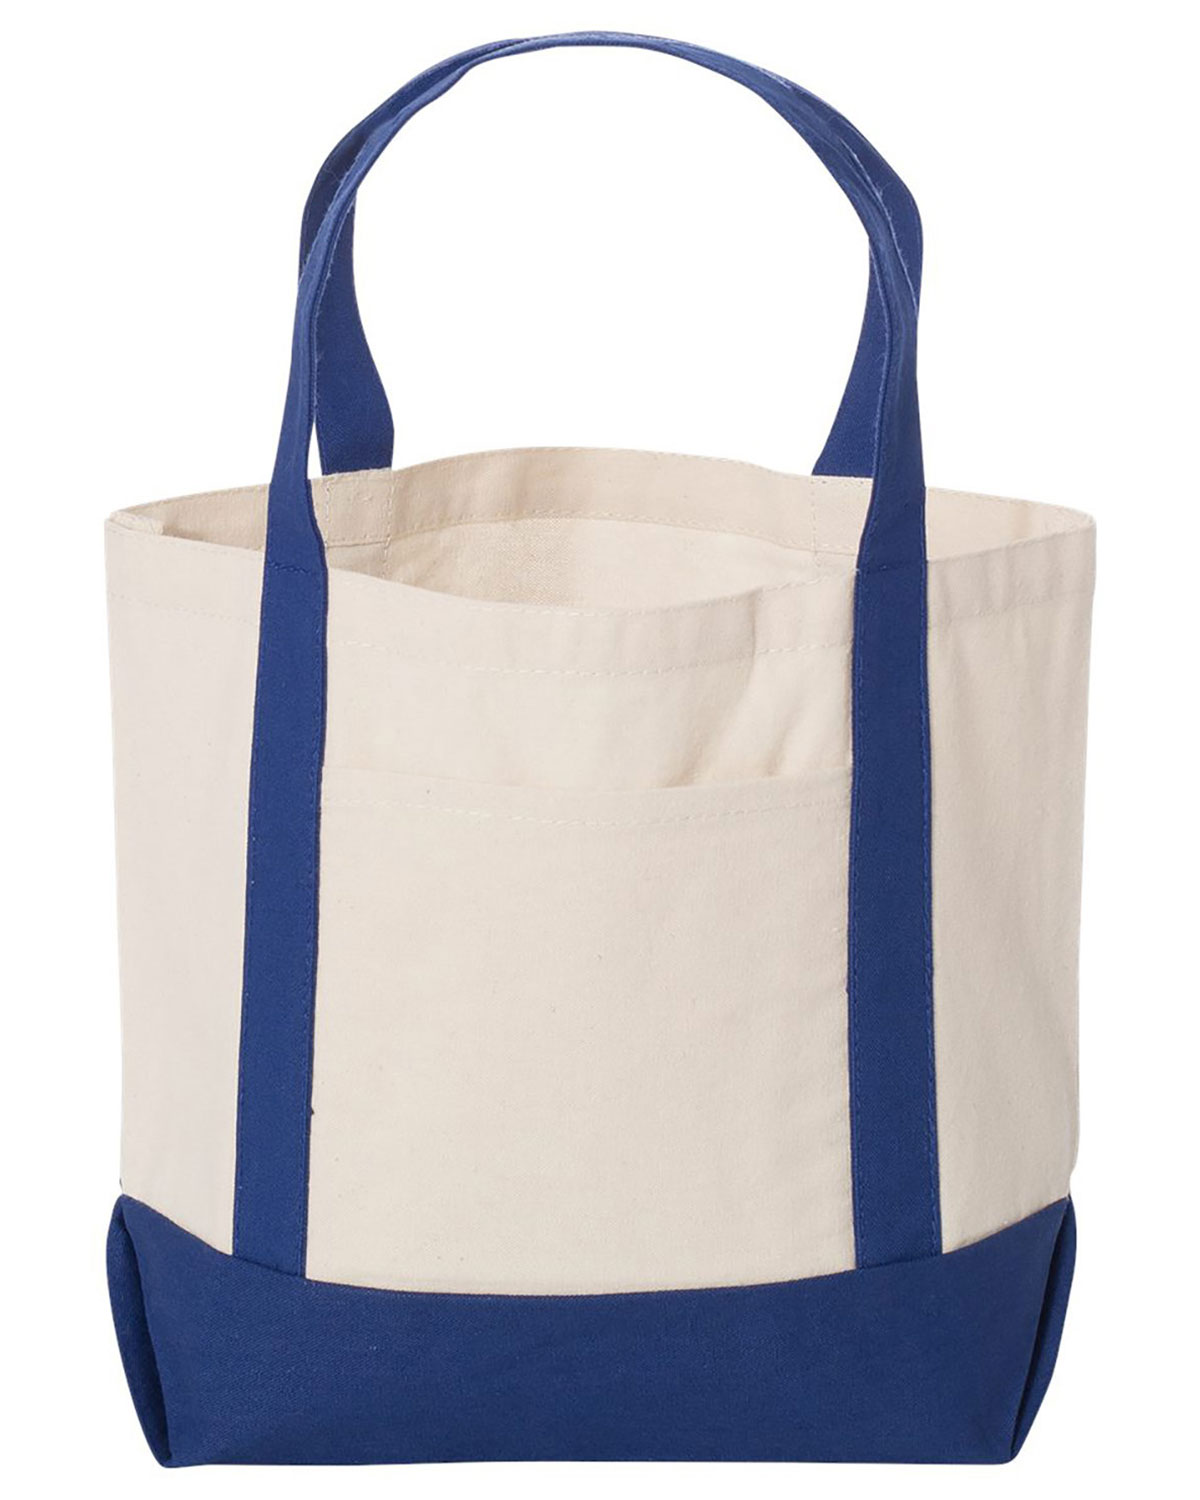 UltraClub 8867 Unisex Seaside Canvas Boat Tote at Apparelstation